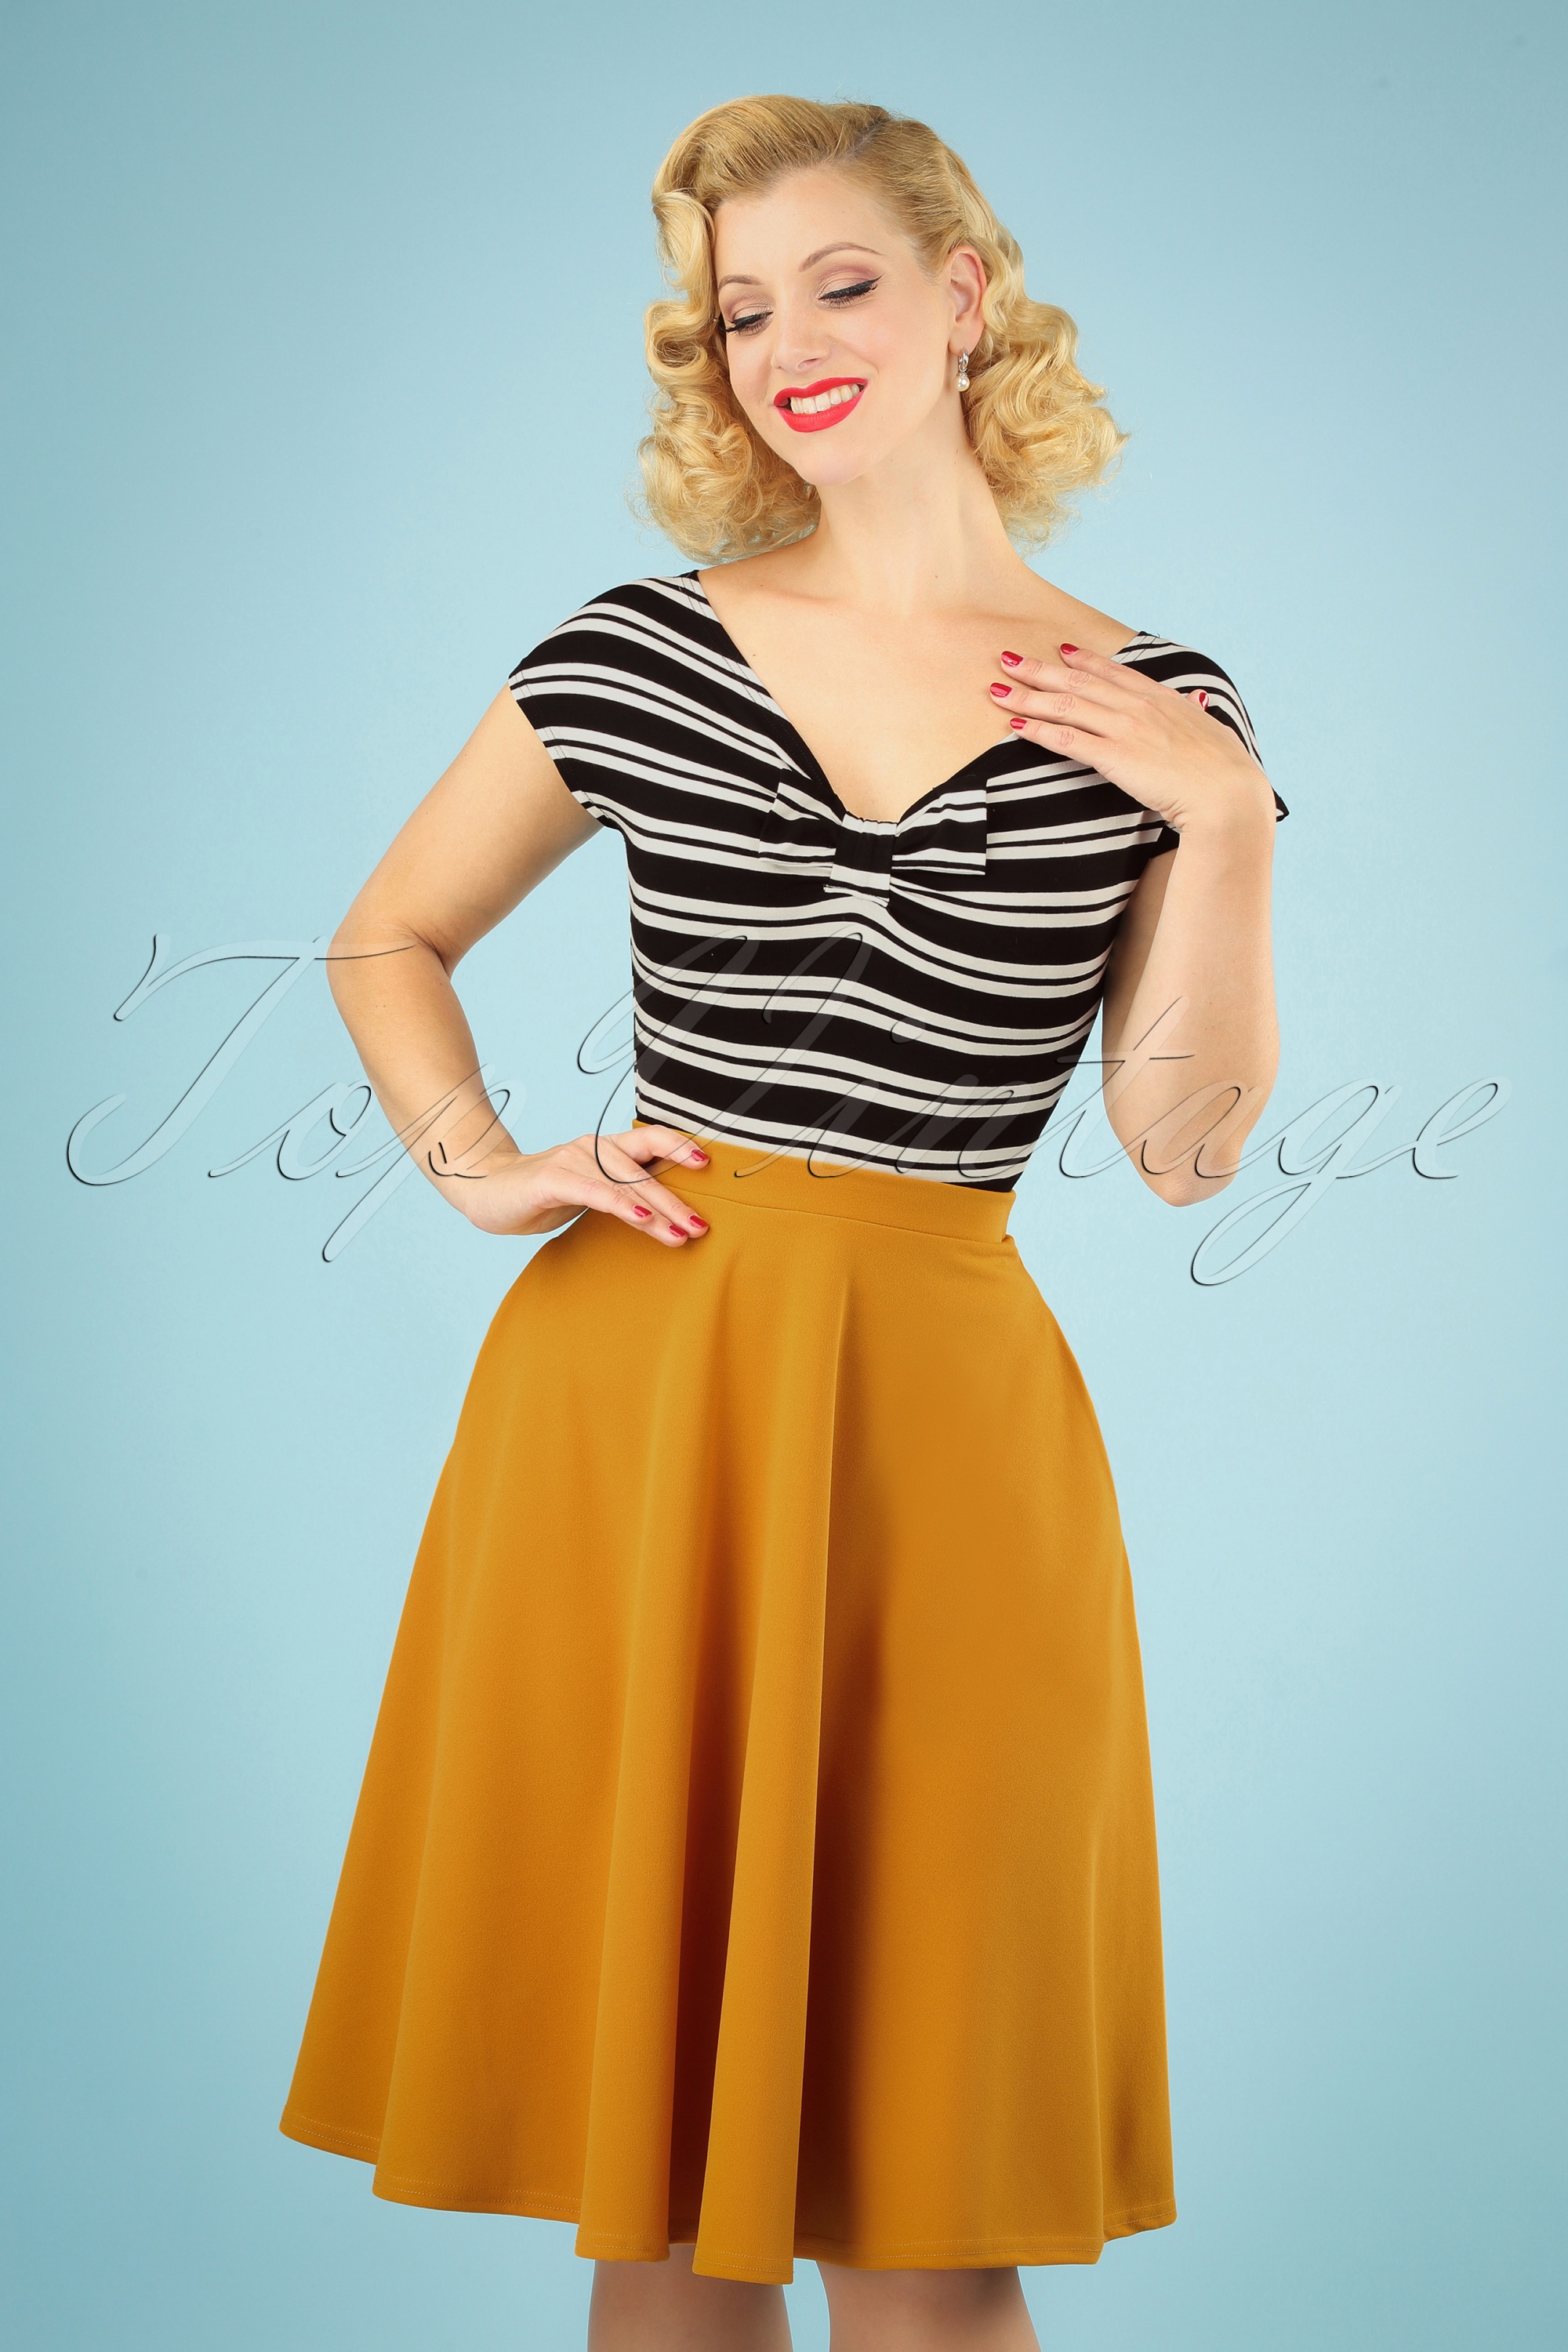 Vintage Chic for Topvintage - Sheila swingrok in mosterd